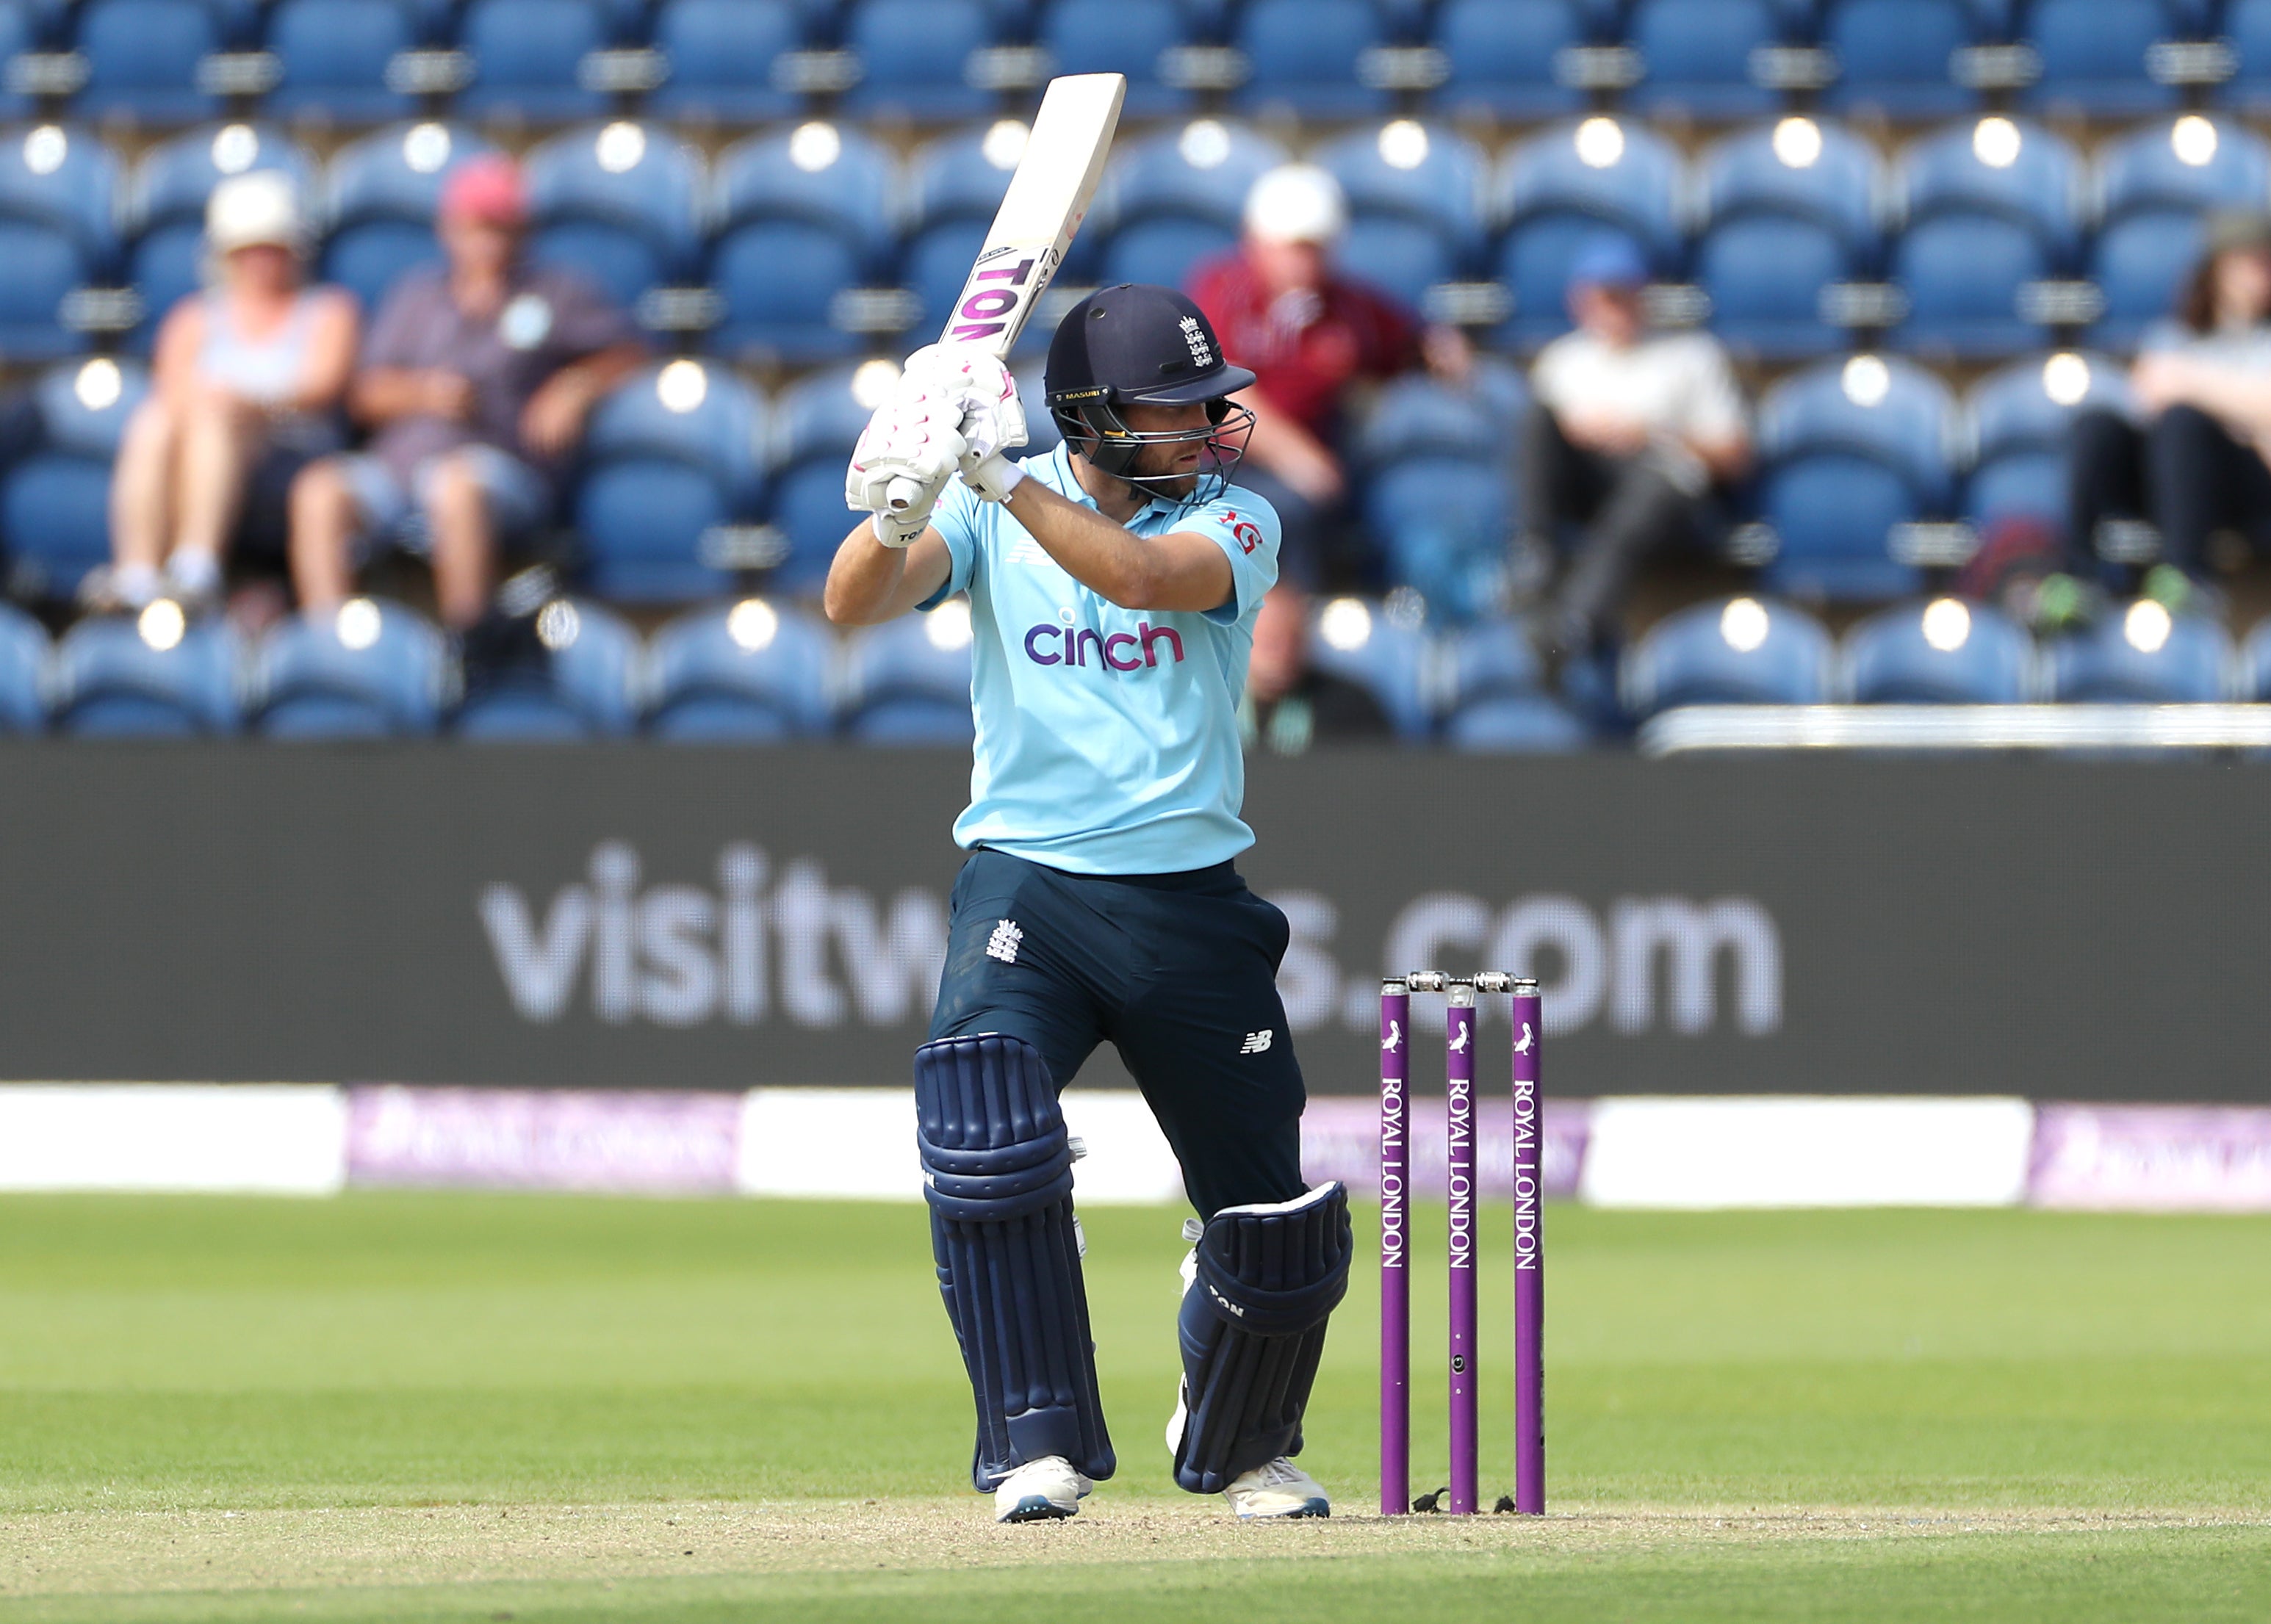 Dawid Malan guided Egland to a comfortable victory